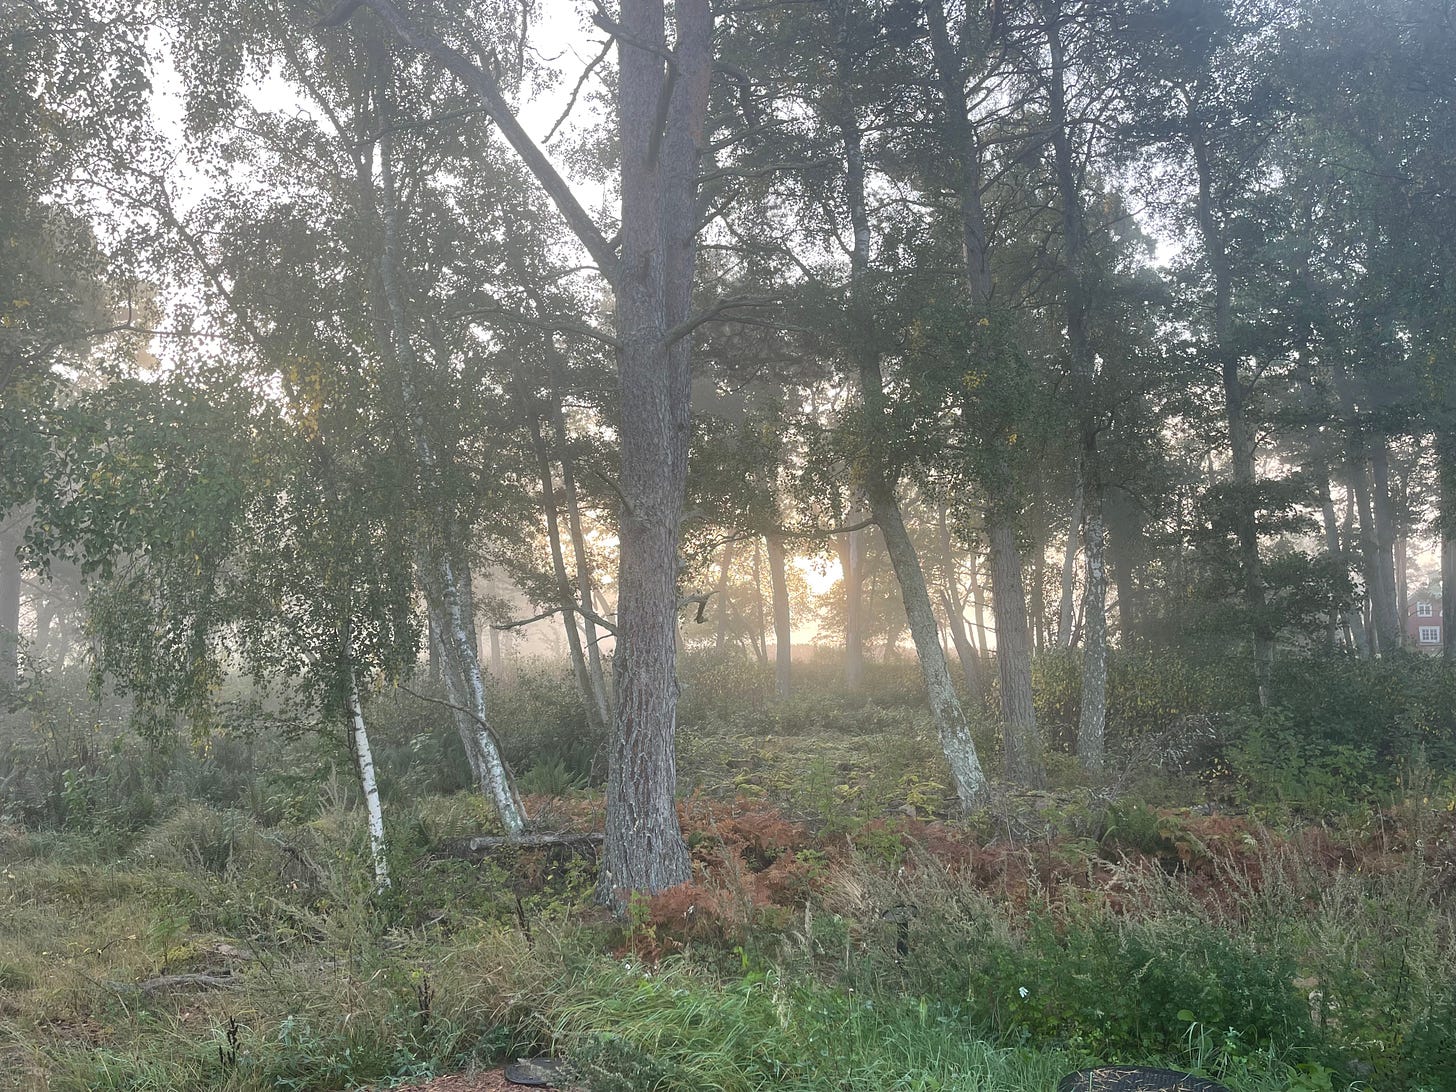 An early autumn forest of birch and pine, with a thin layer of mist and the sun in the background through the trees. The ground is covered by lush green vegetation including ferns.